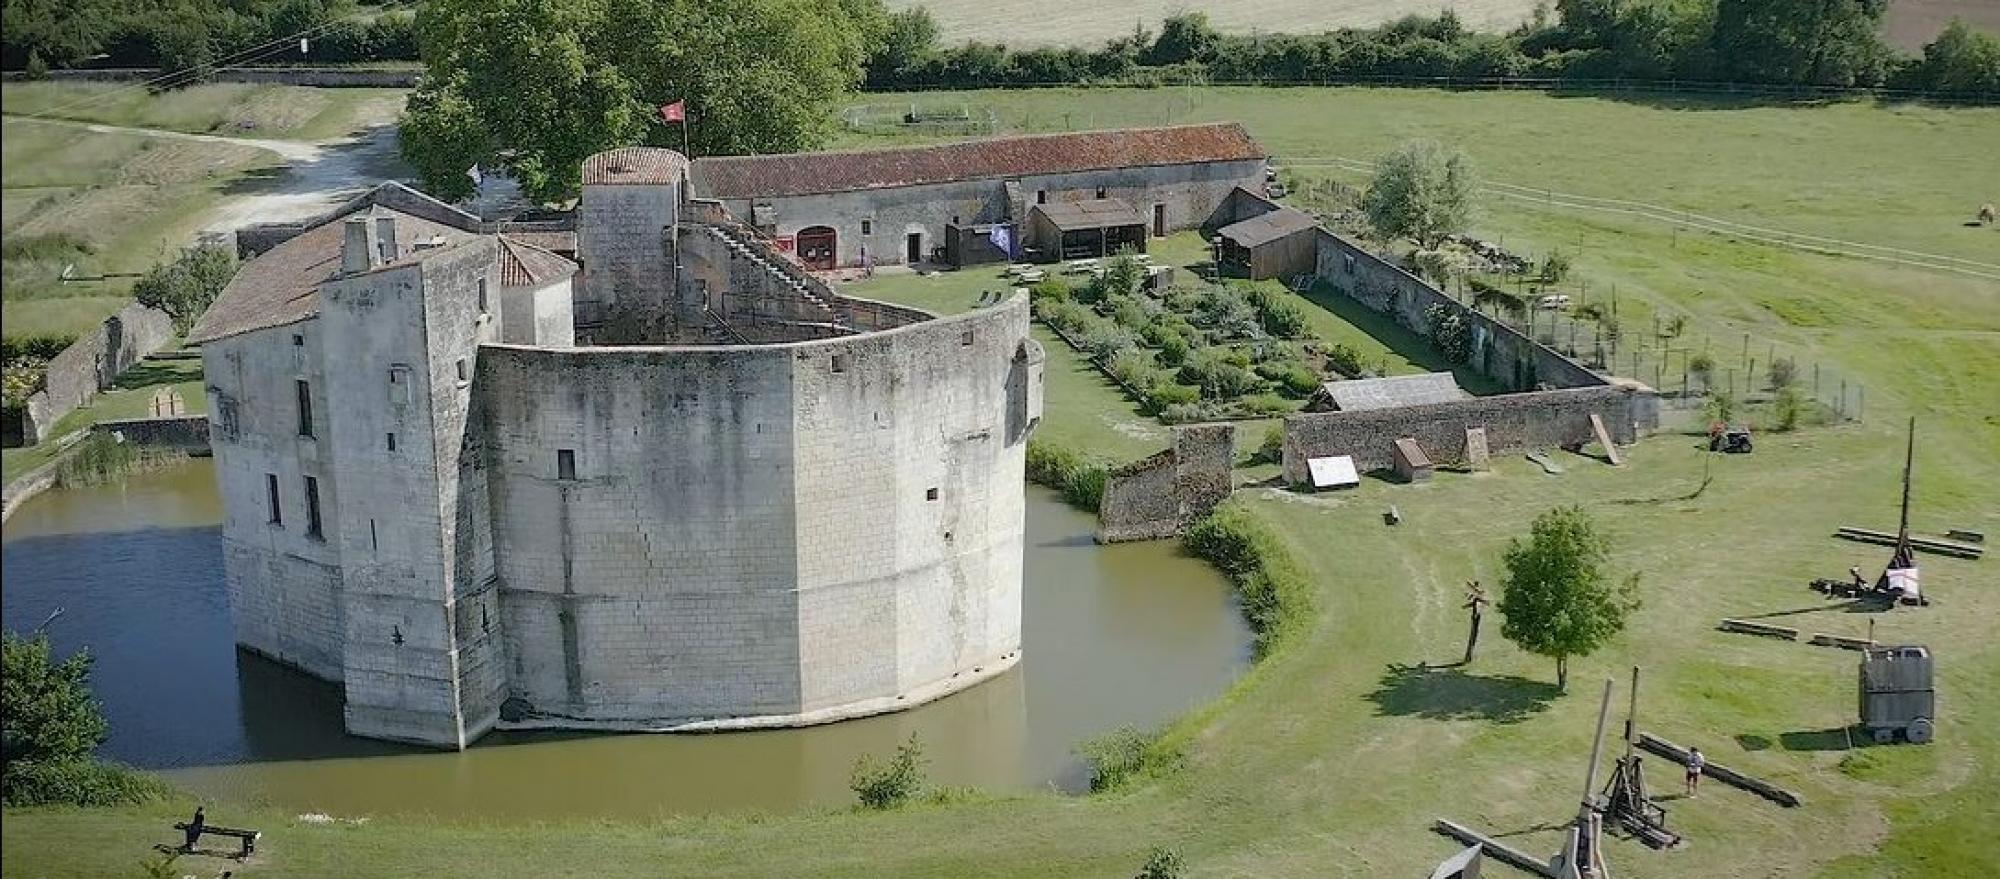 A little bit of history - Fortified castle and medieval theme park in Charente Maritime